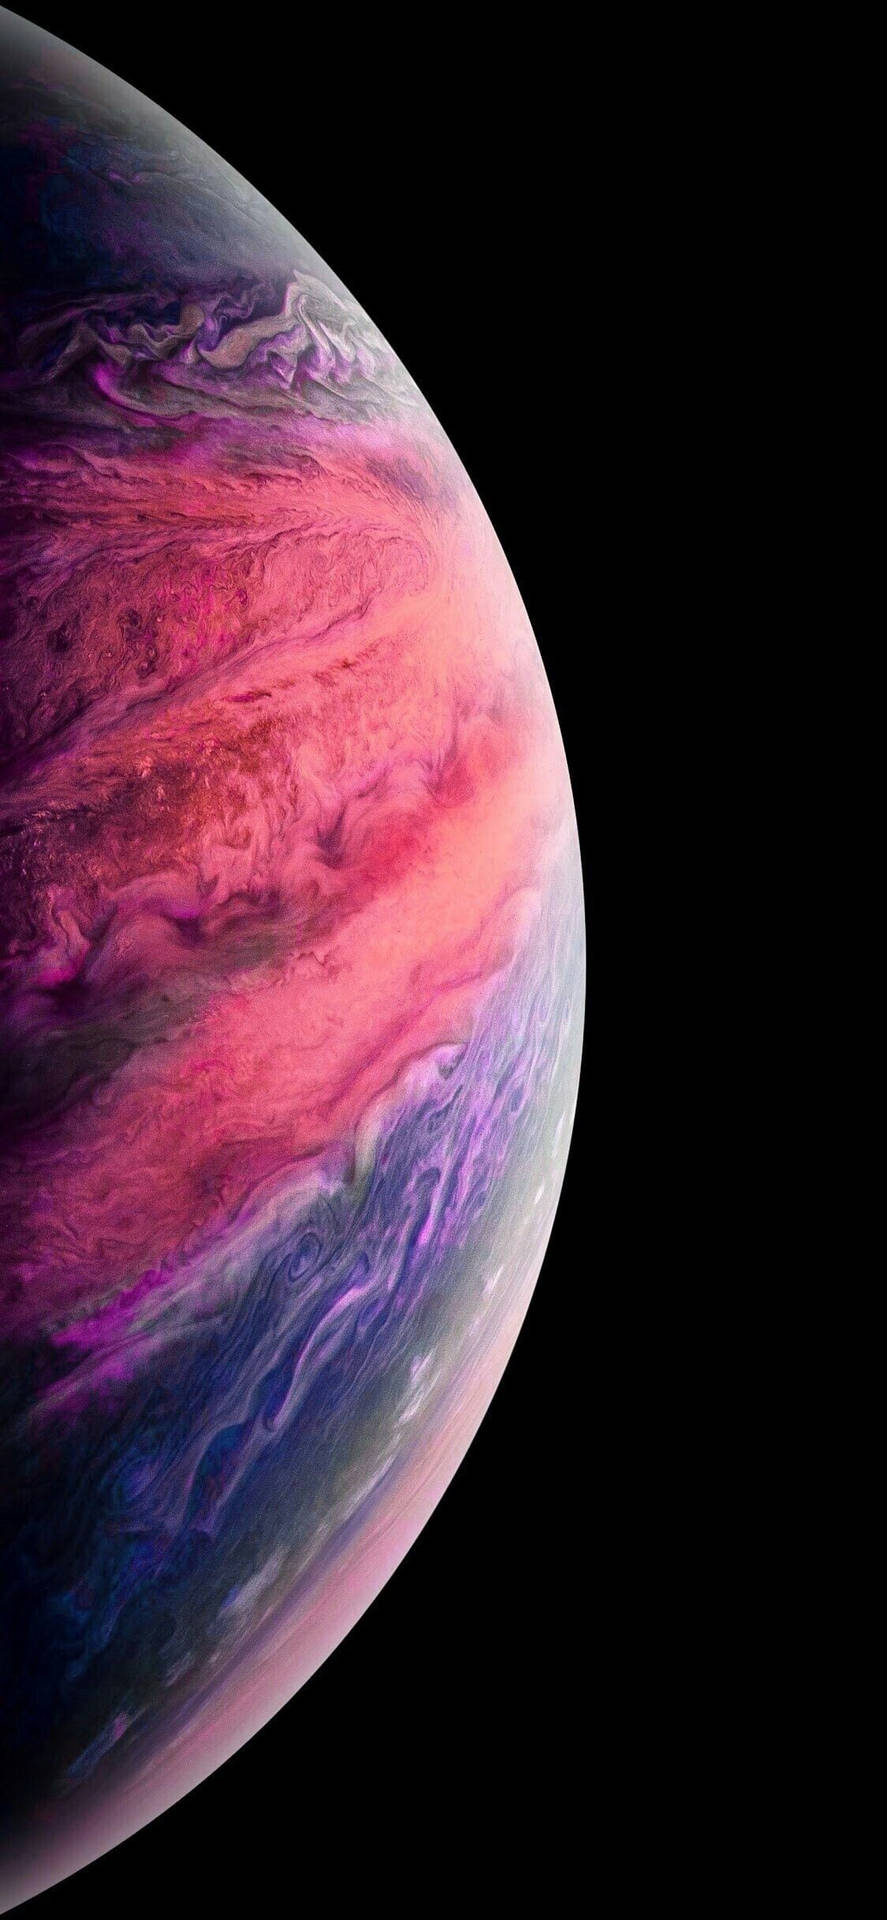 iPhone Wallpapers - Wallpapers for iPhone XS, iPhone XR and iPhone